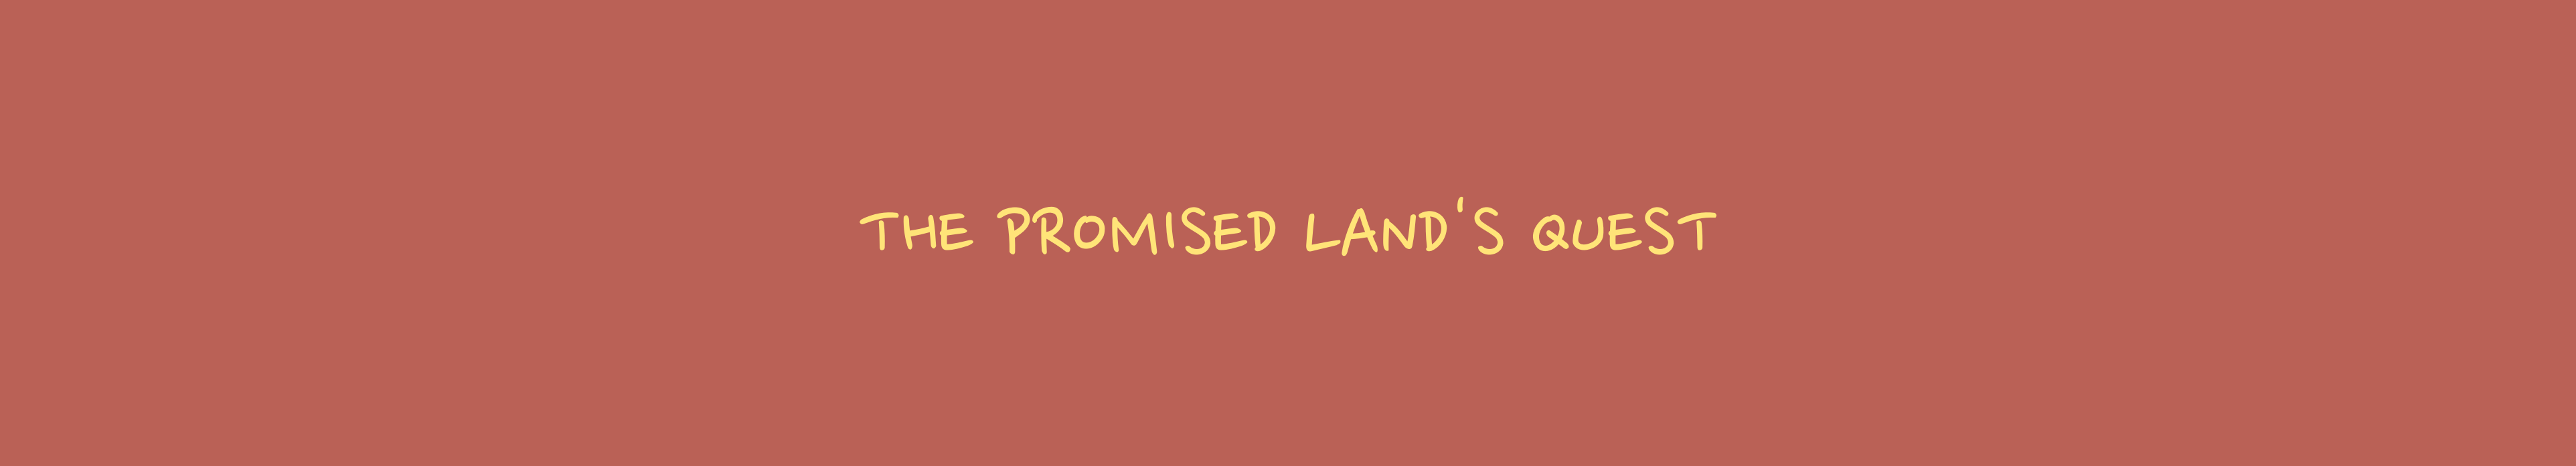 The promised land's quest